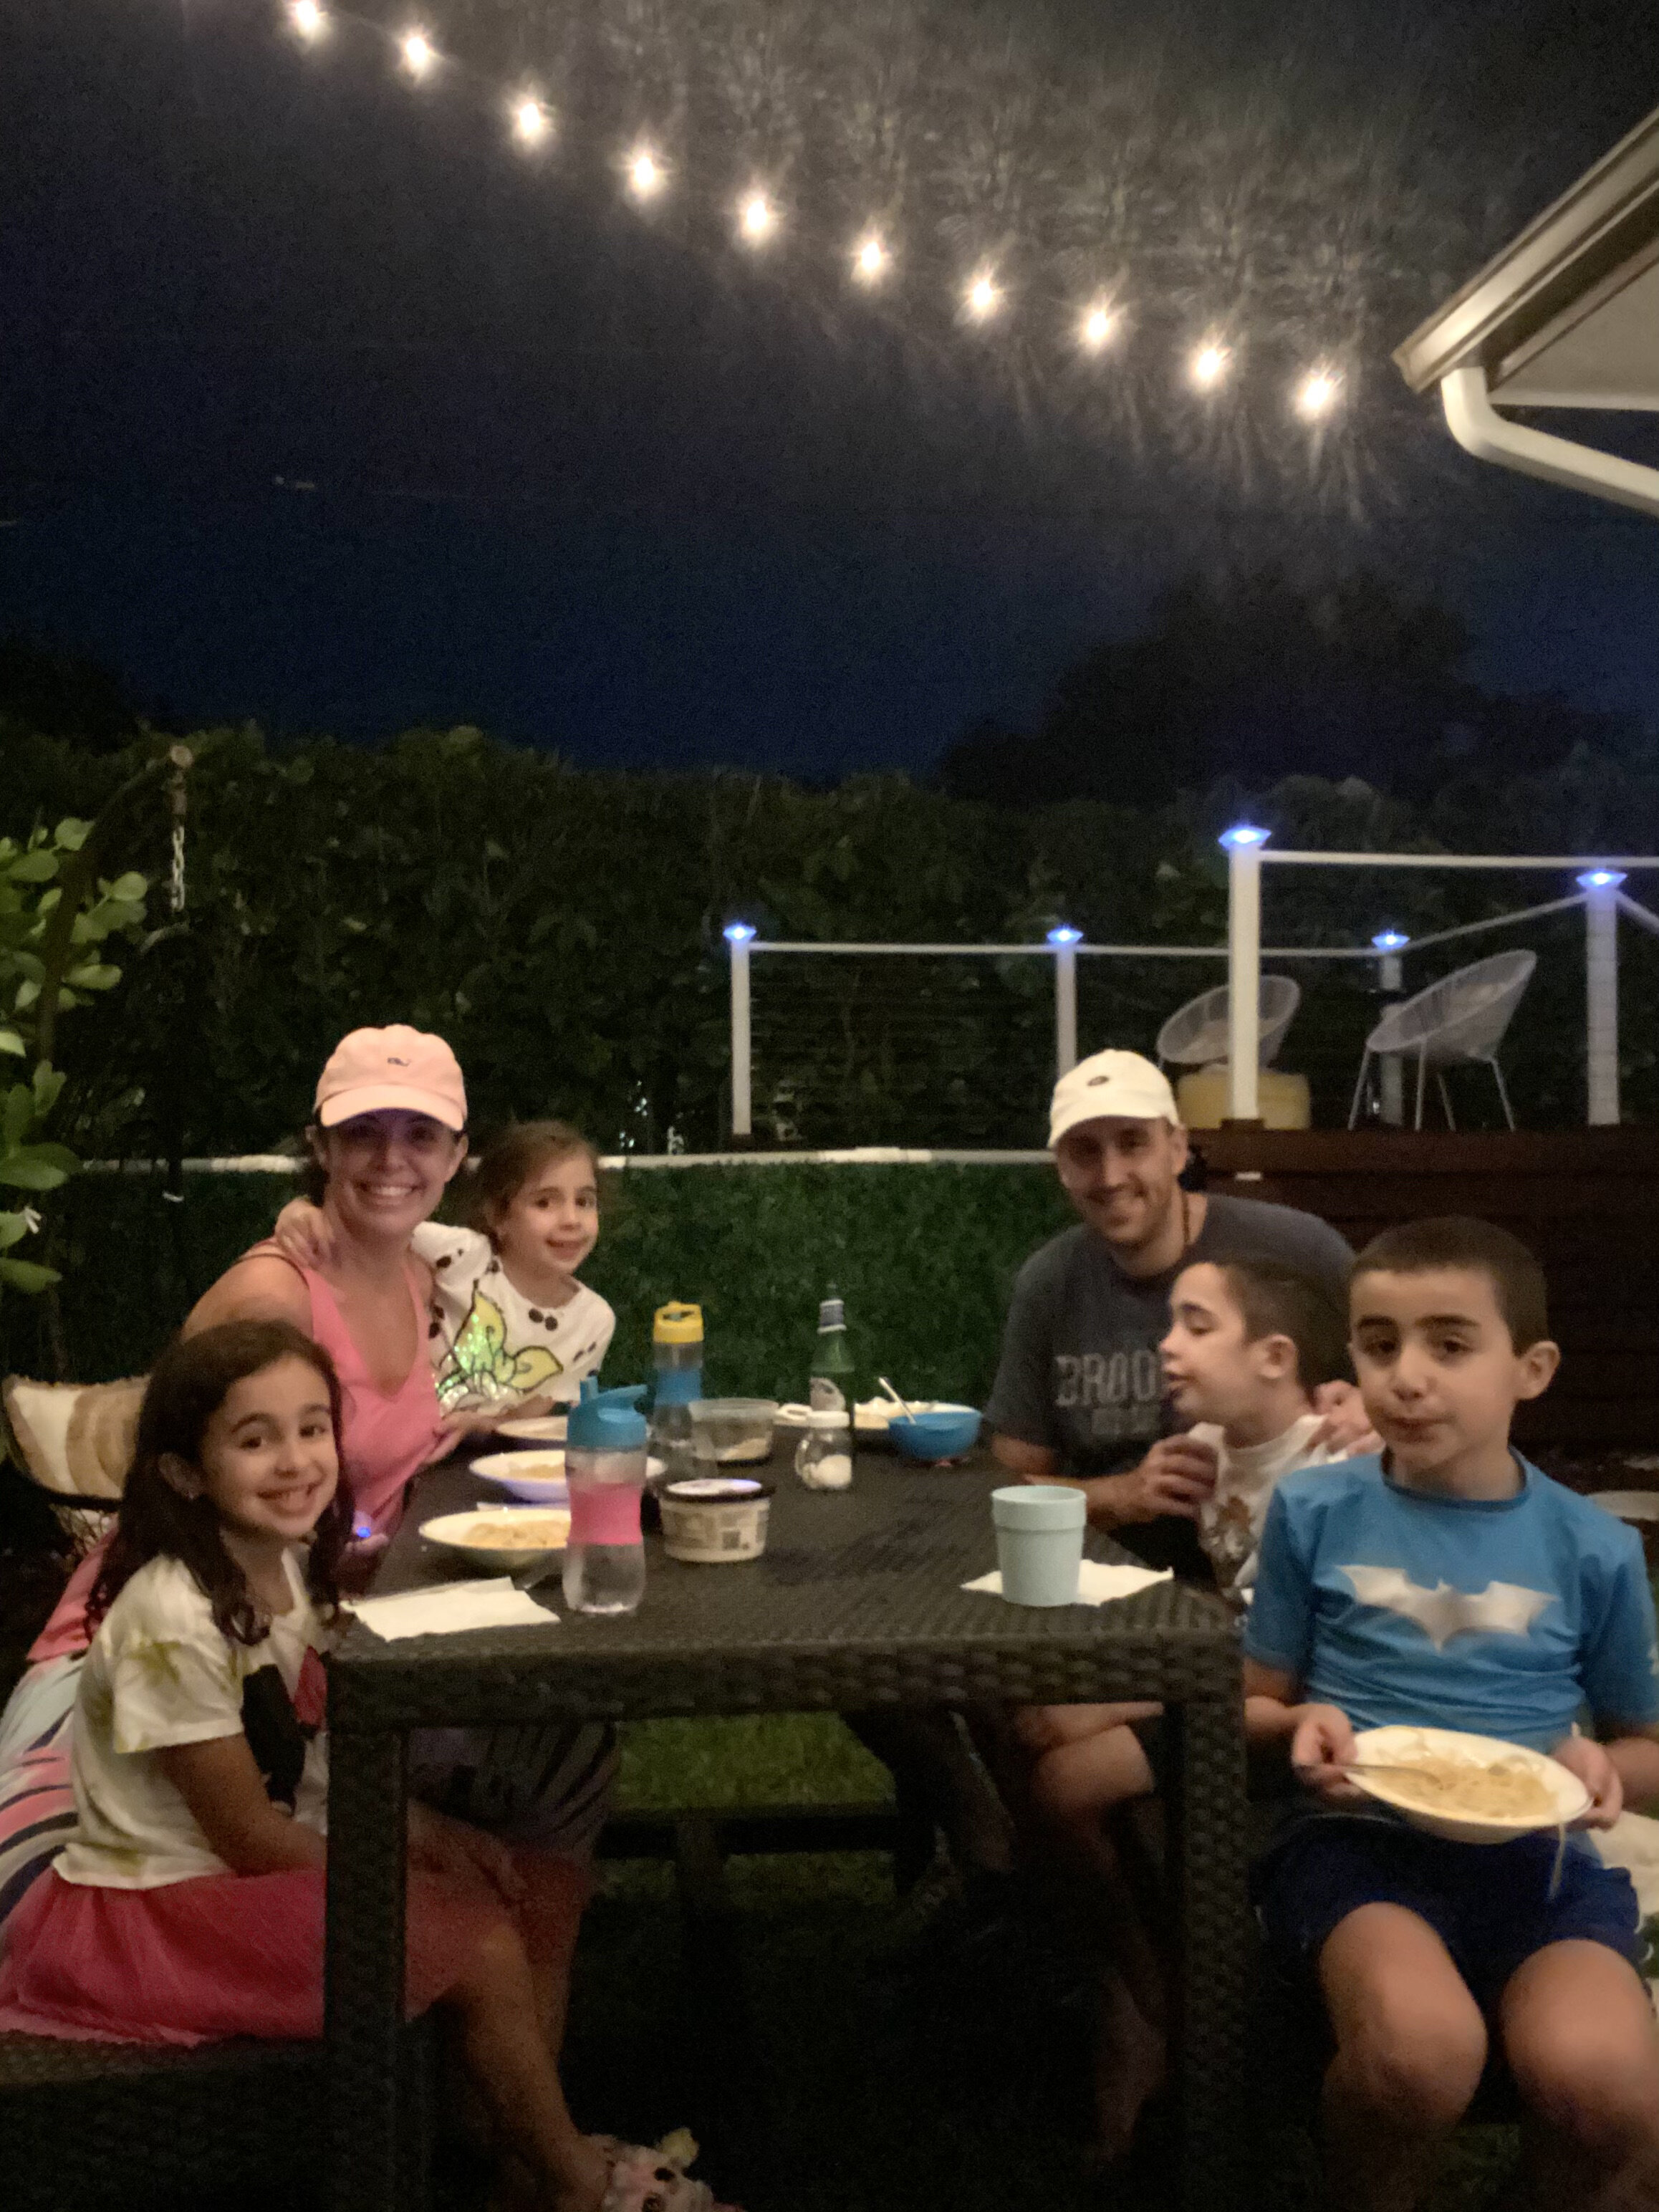 Enjoying our first outdoor family dinner in our newly design backyard